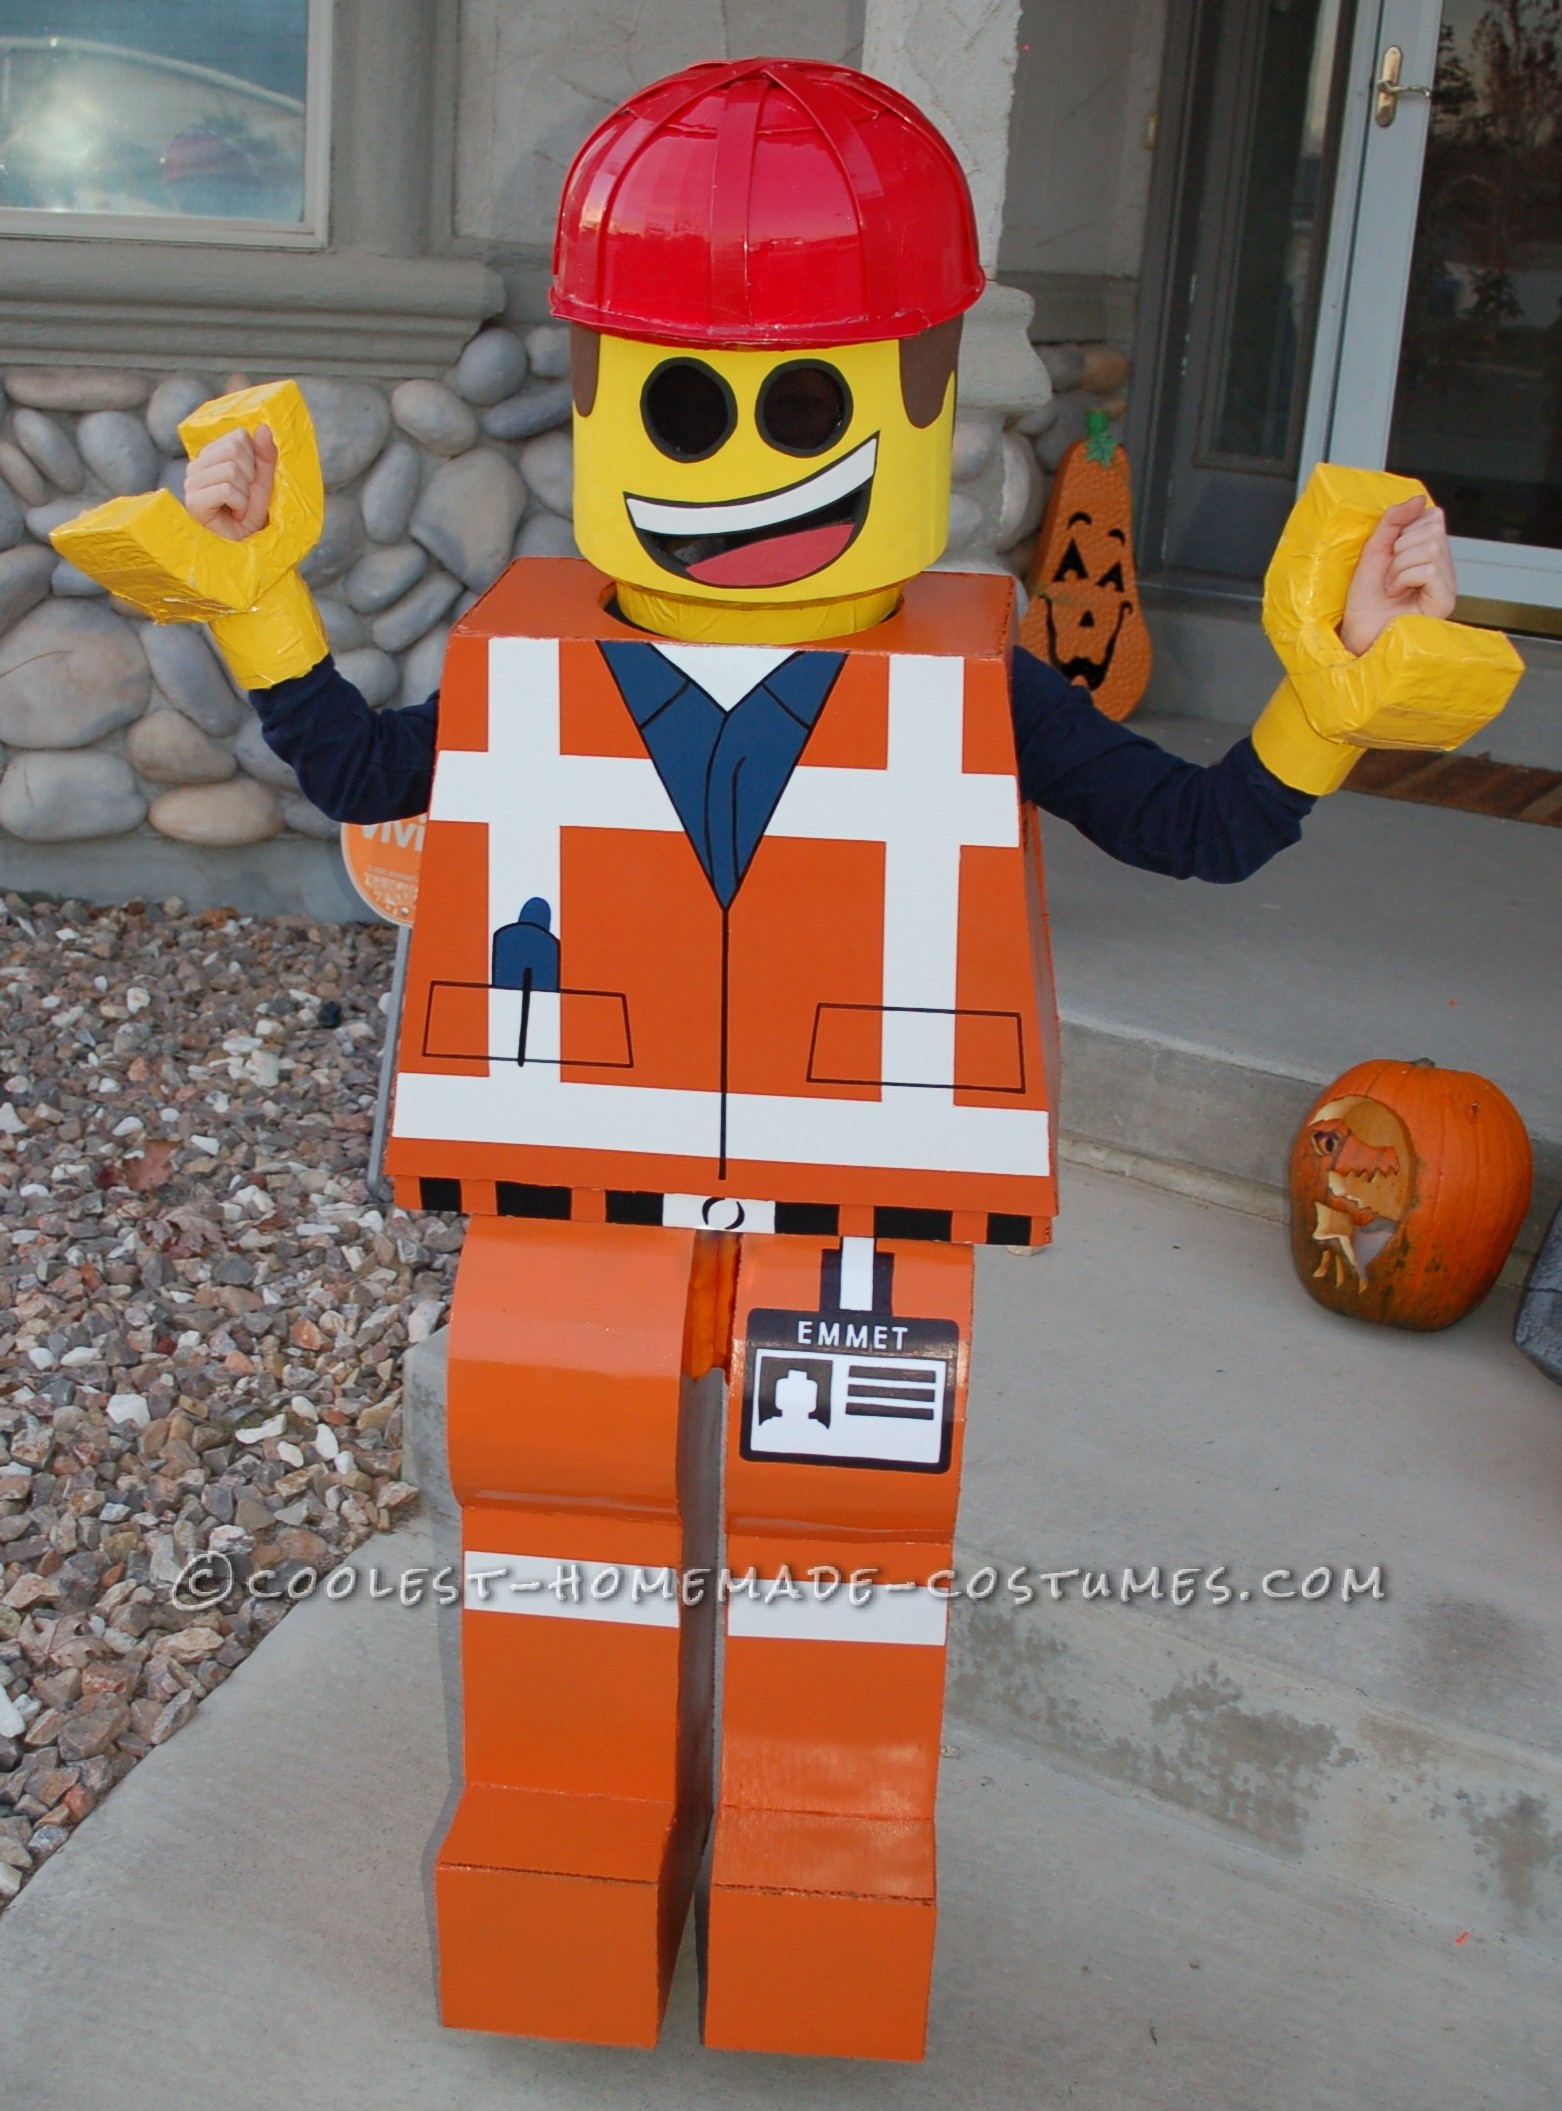 Everything is AWESOME about this Emmet Costume